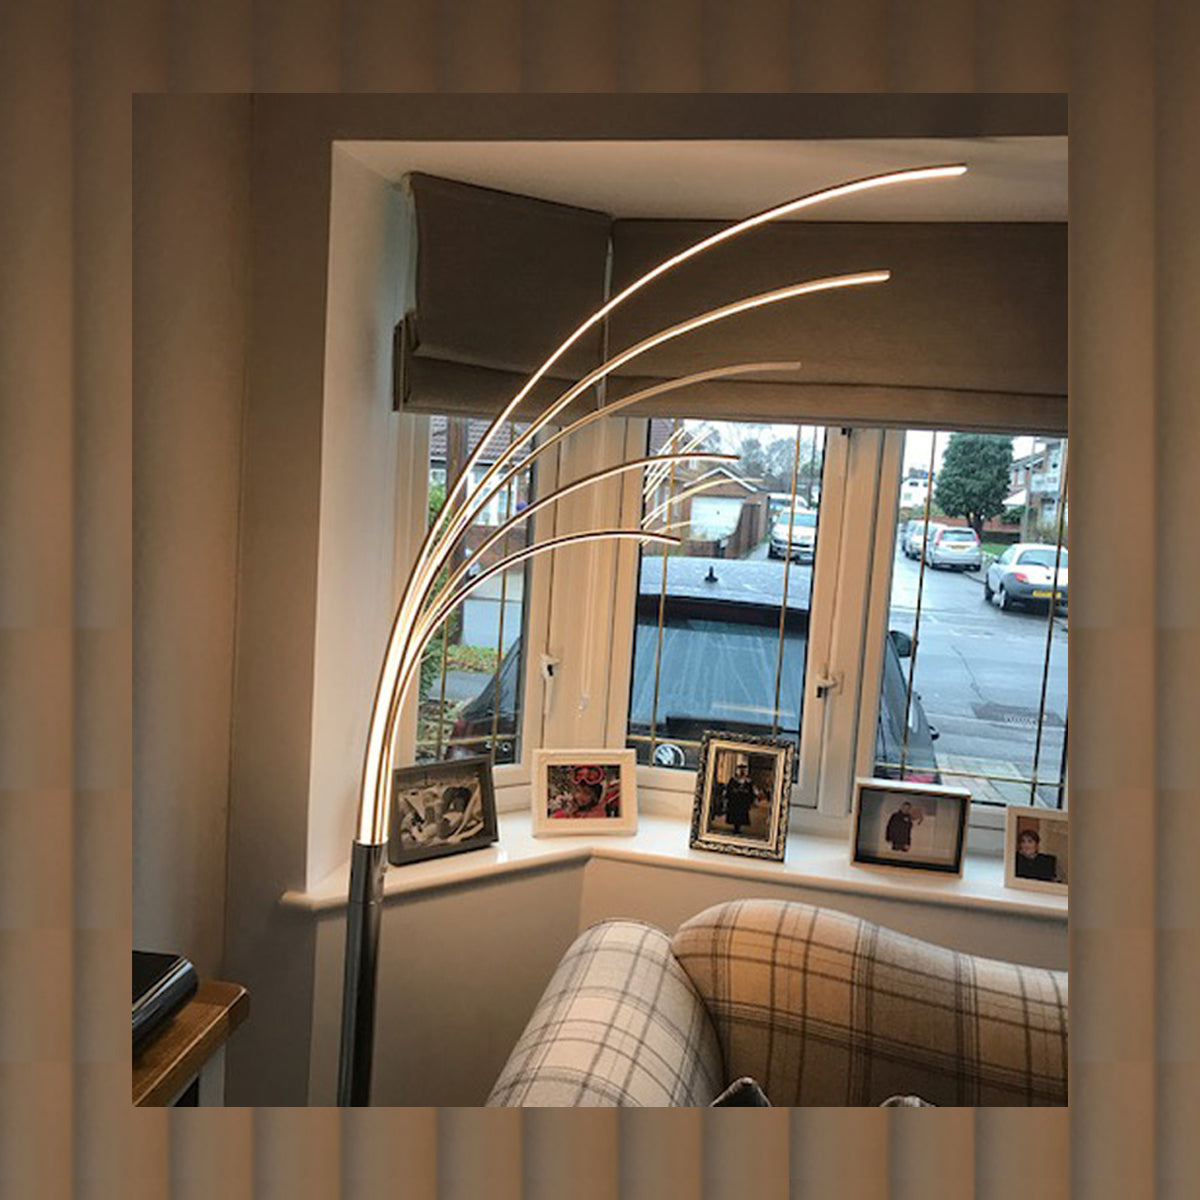 There is no doubt that our Sarah contemporary floor lamp fits in very well with modern settings as the overall appearance of the floor lamp is so minimal. The arched arms are covered with LED strips and therefore offer a beautiful lighting experience for contemporary living areas. The LED technology also ensures that the floor lamp features low energy consumption, whilst still providing bright light.